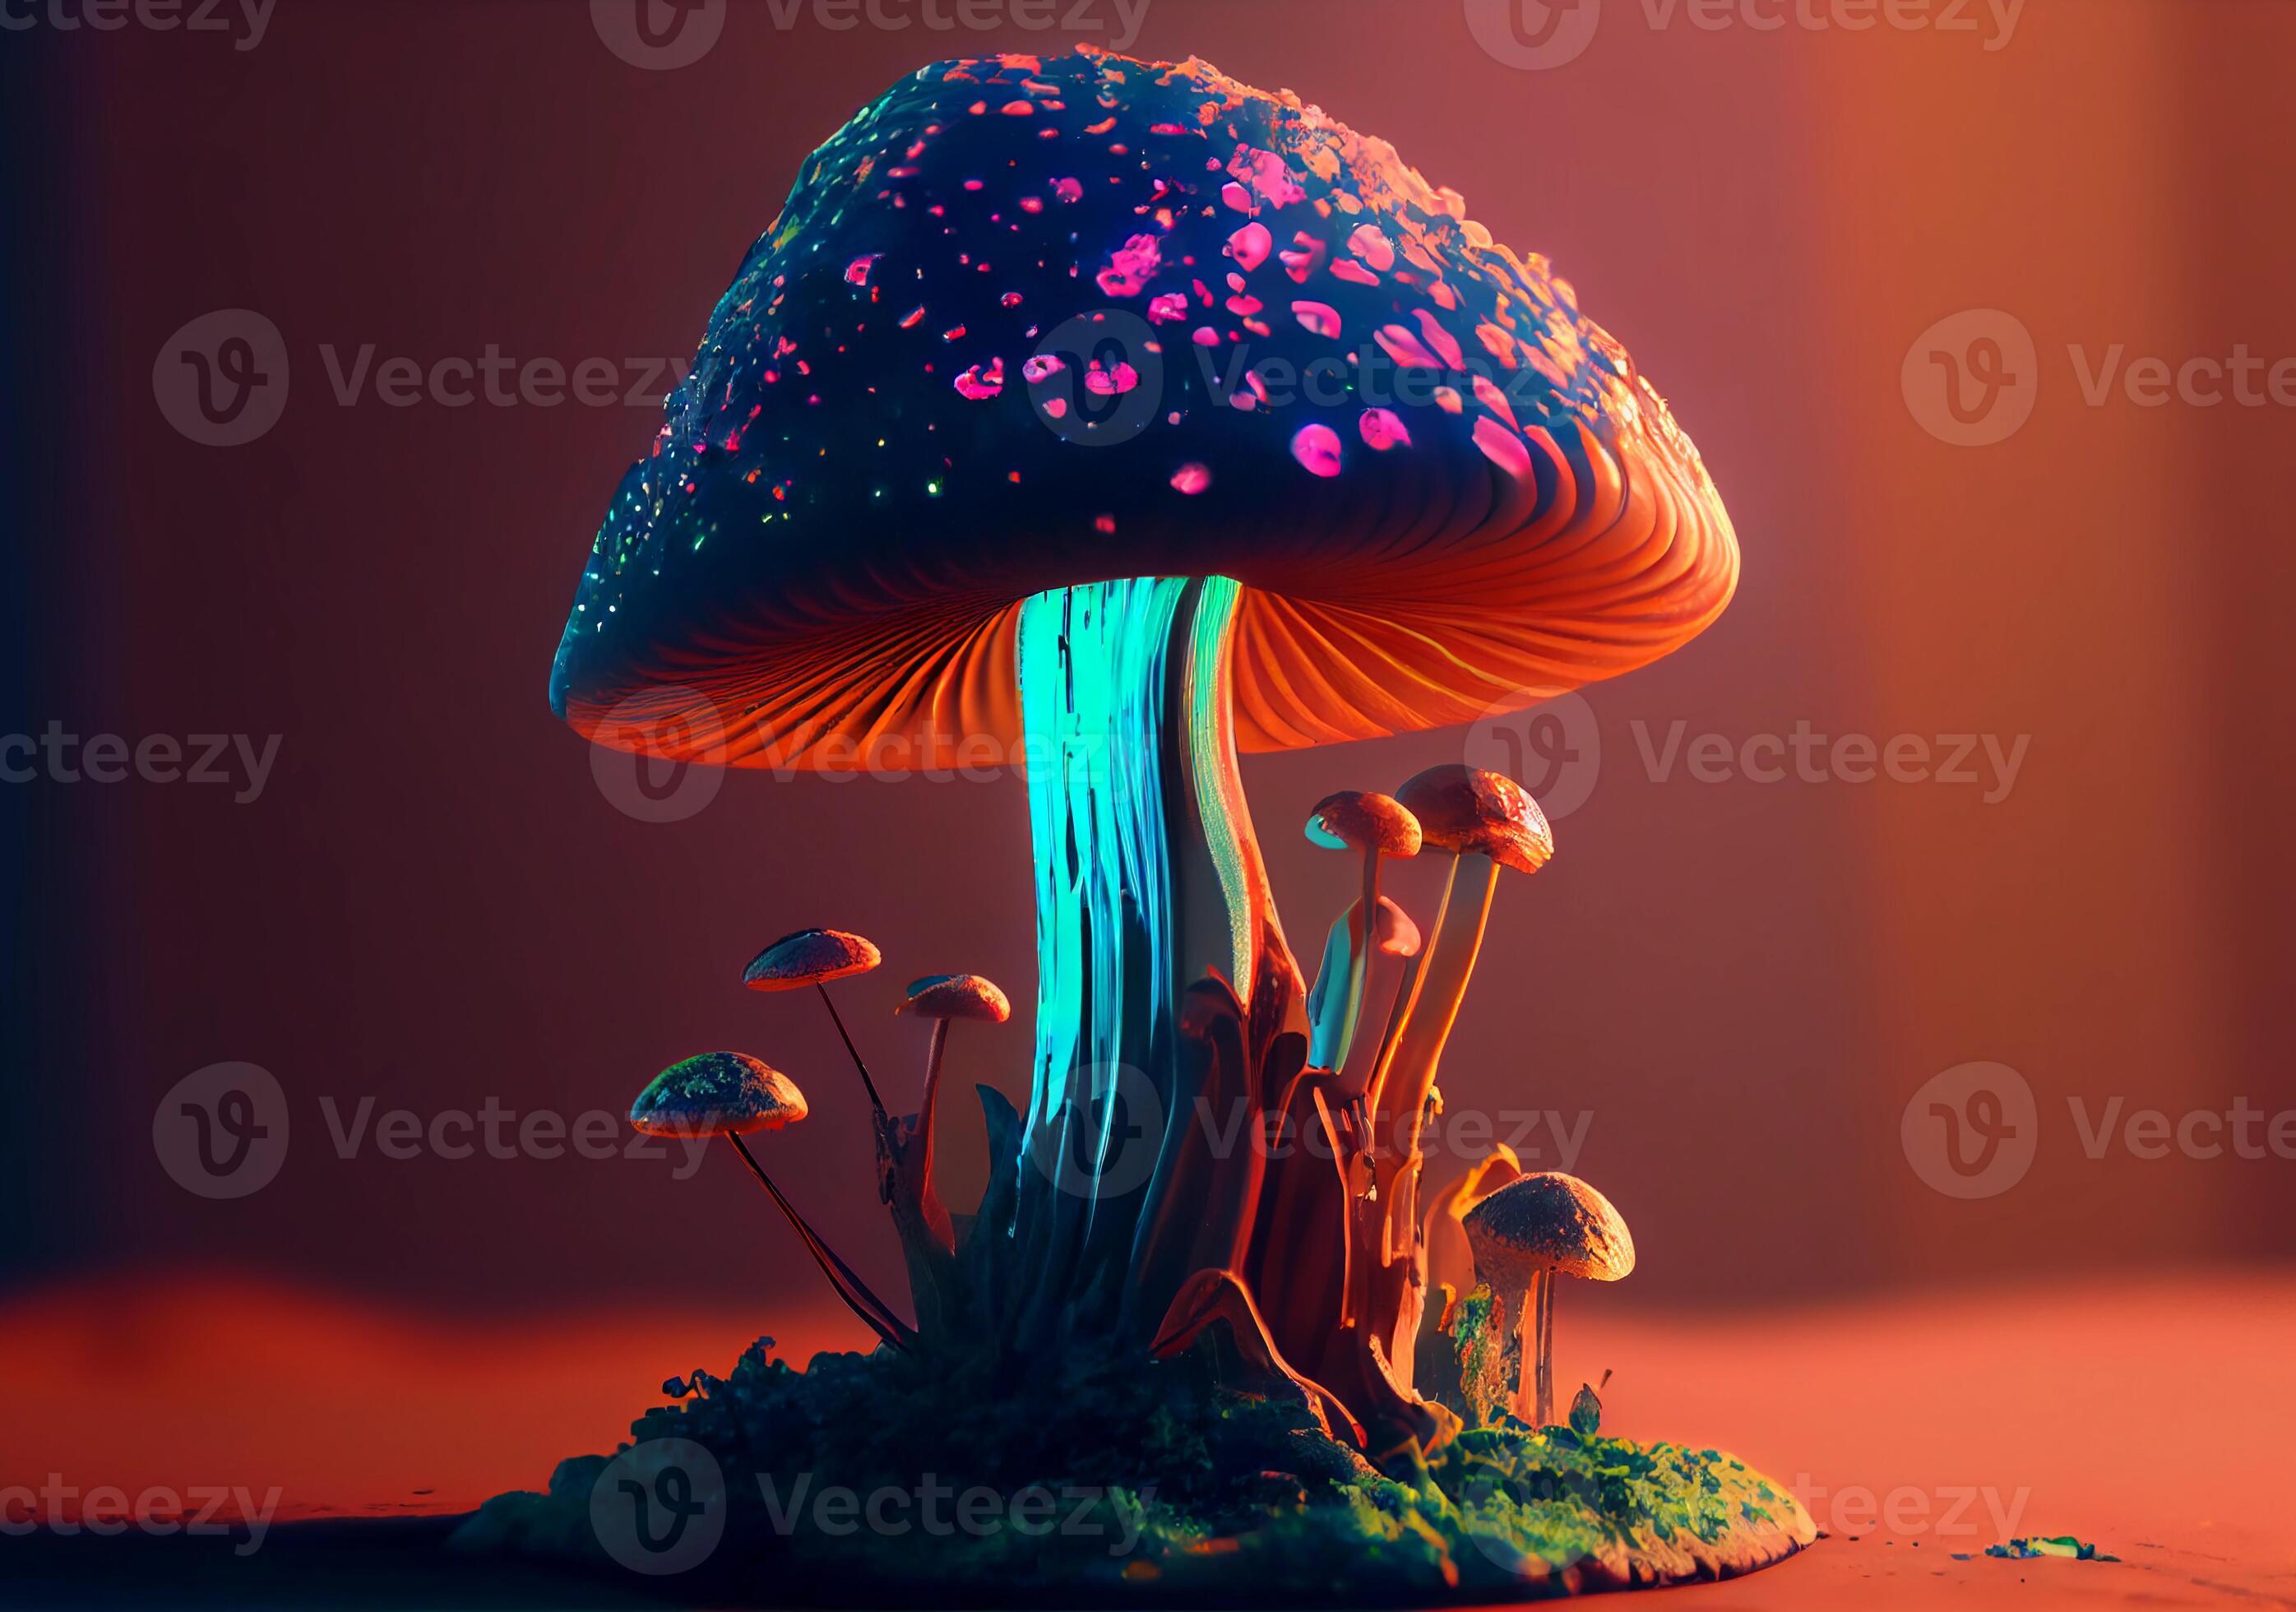 Glowing Mushroom Background Images HD Pictures and Wallpaper For Free  Download  Pngtree